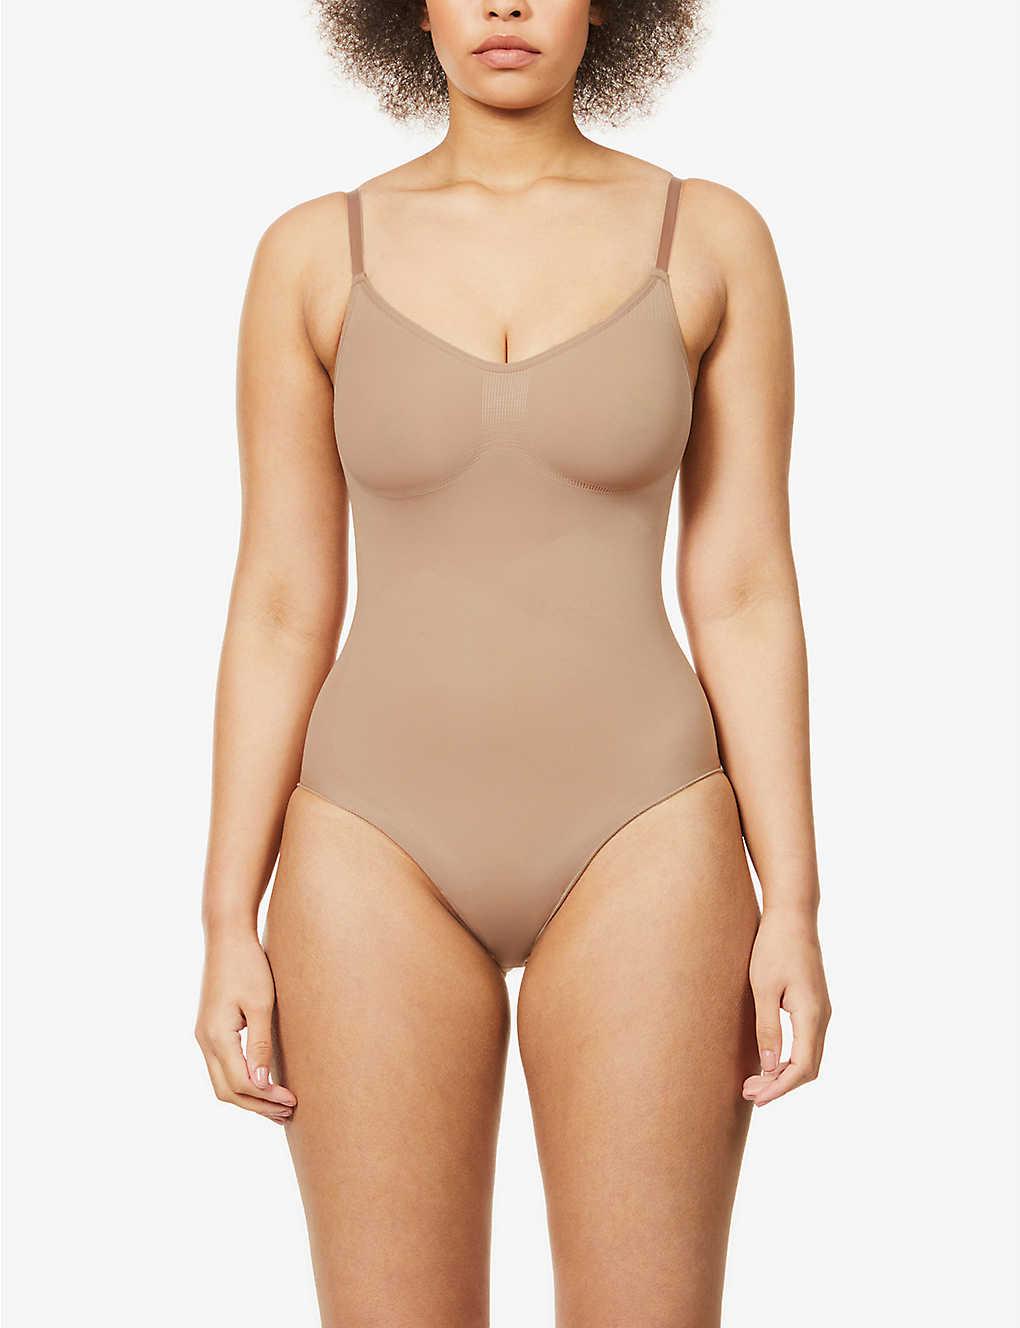 Wedding Shapewear: Our Top Picks + The Expert Advice You Need to